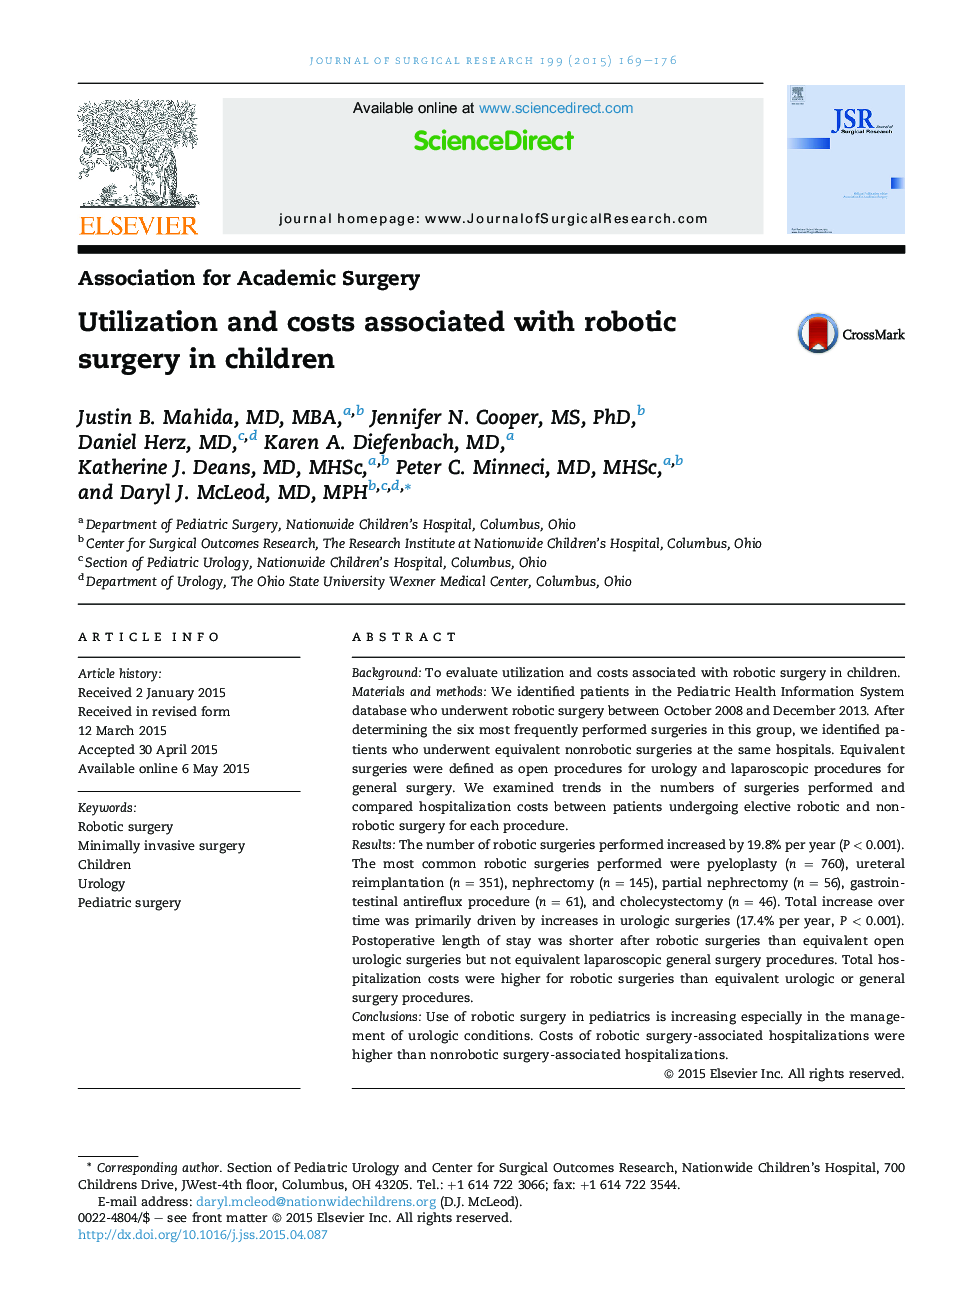 Utilization and costs associated with robotic surgery in children